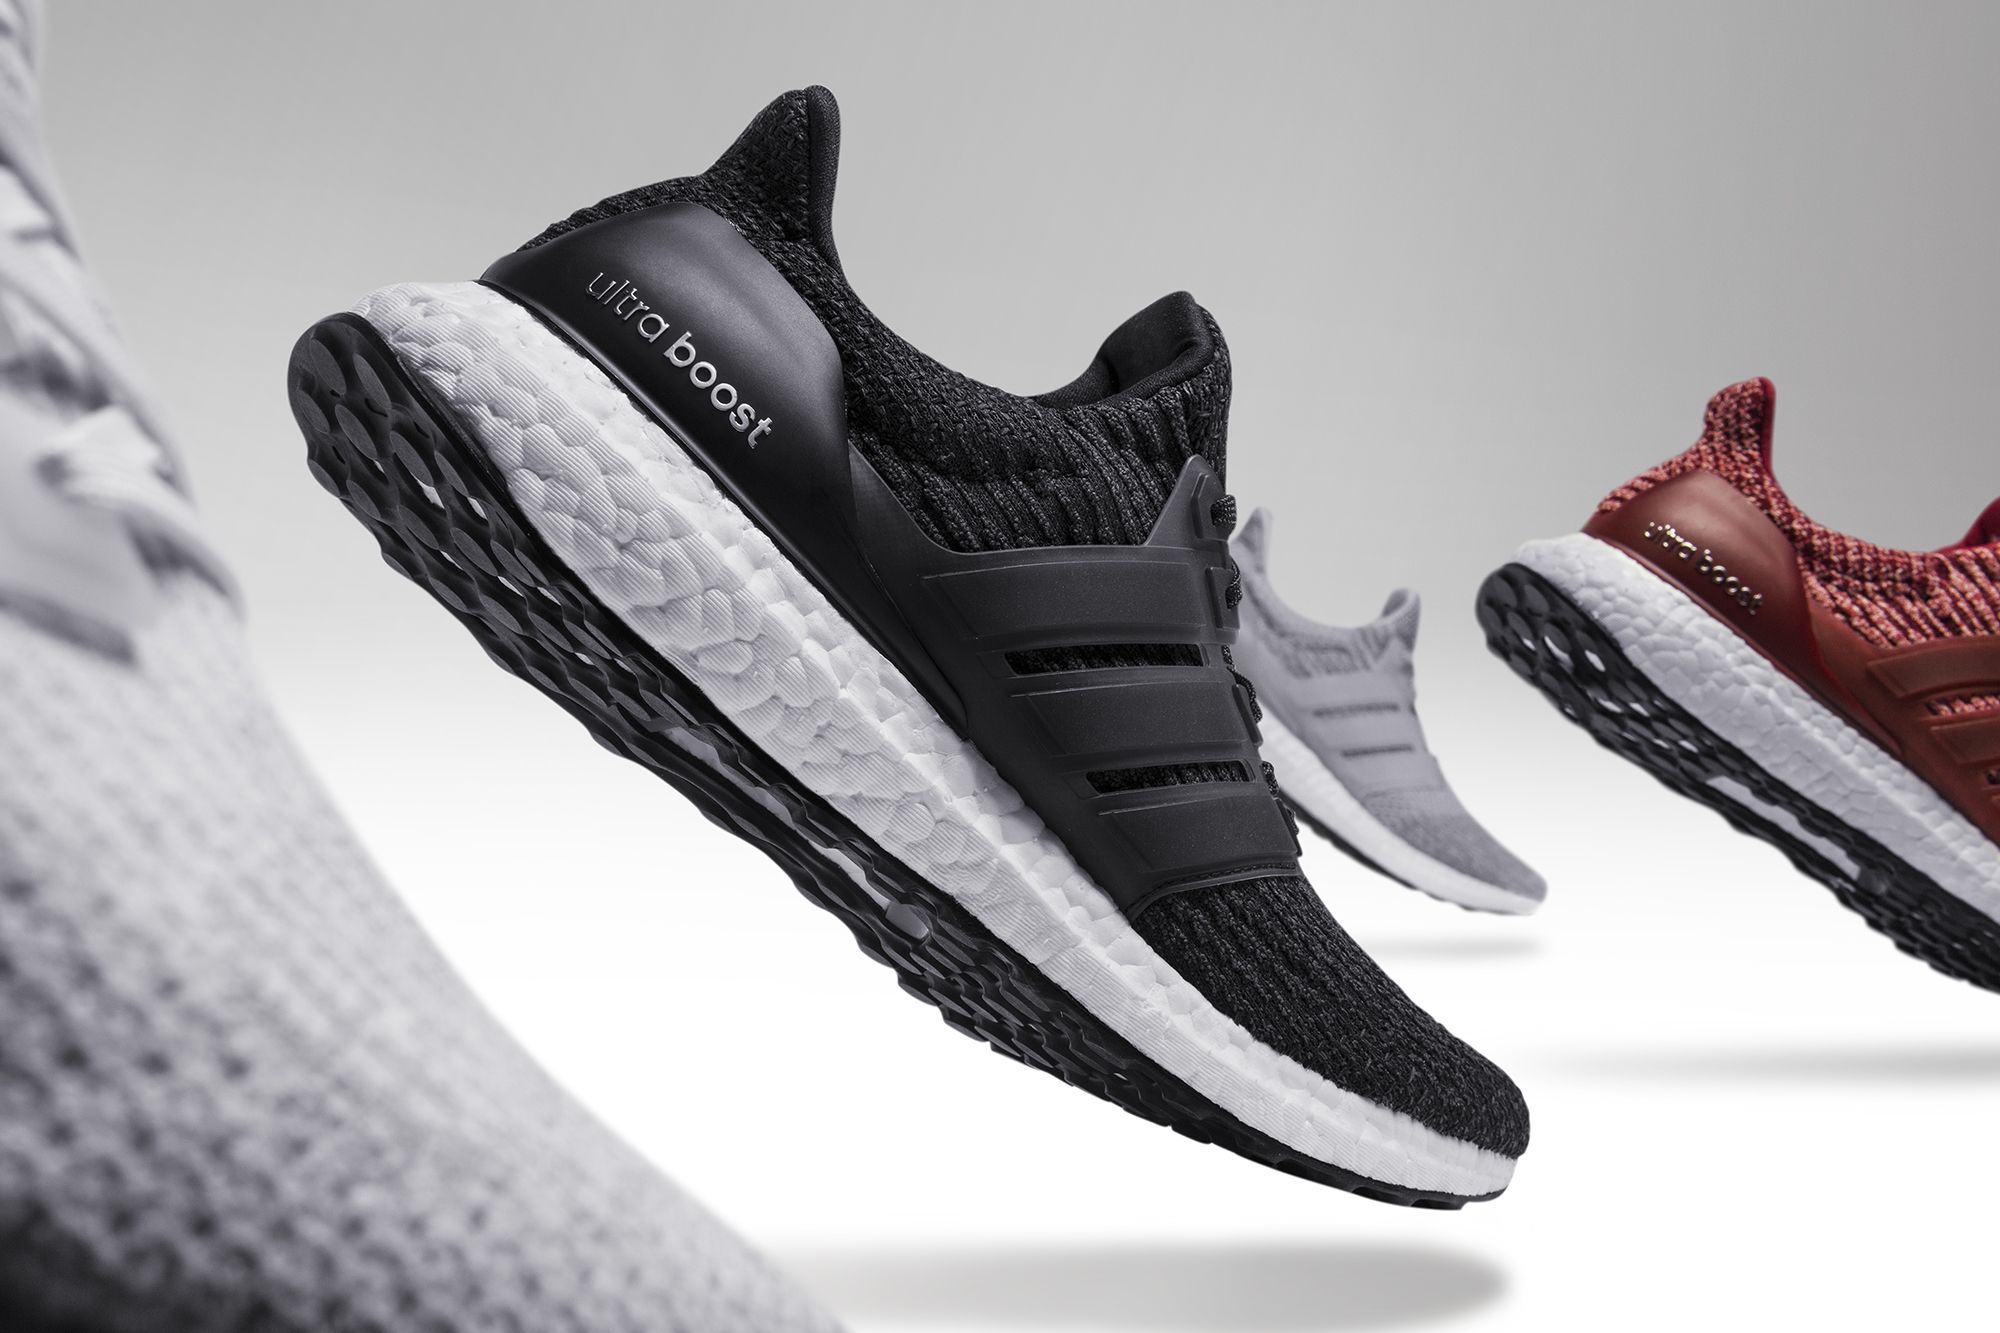 Adidas Release Date - How to Get the New Ultra Boost 3.0